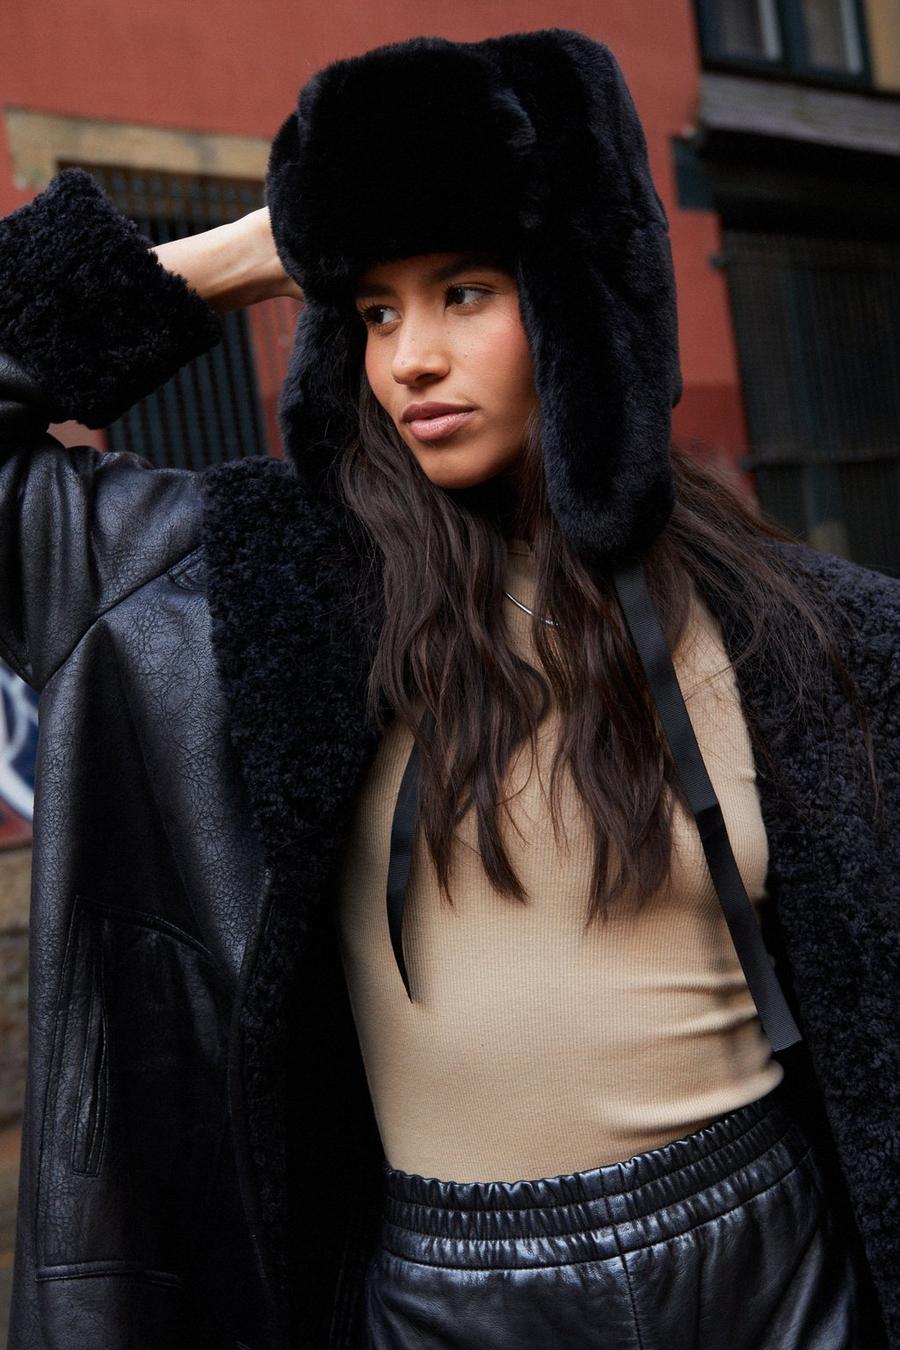 Hats and Hair Accessories | Fedoras & Headscarfs | Nasty Gal